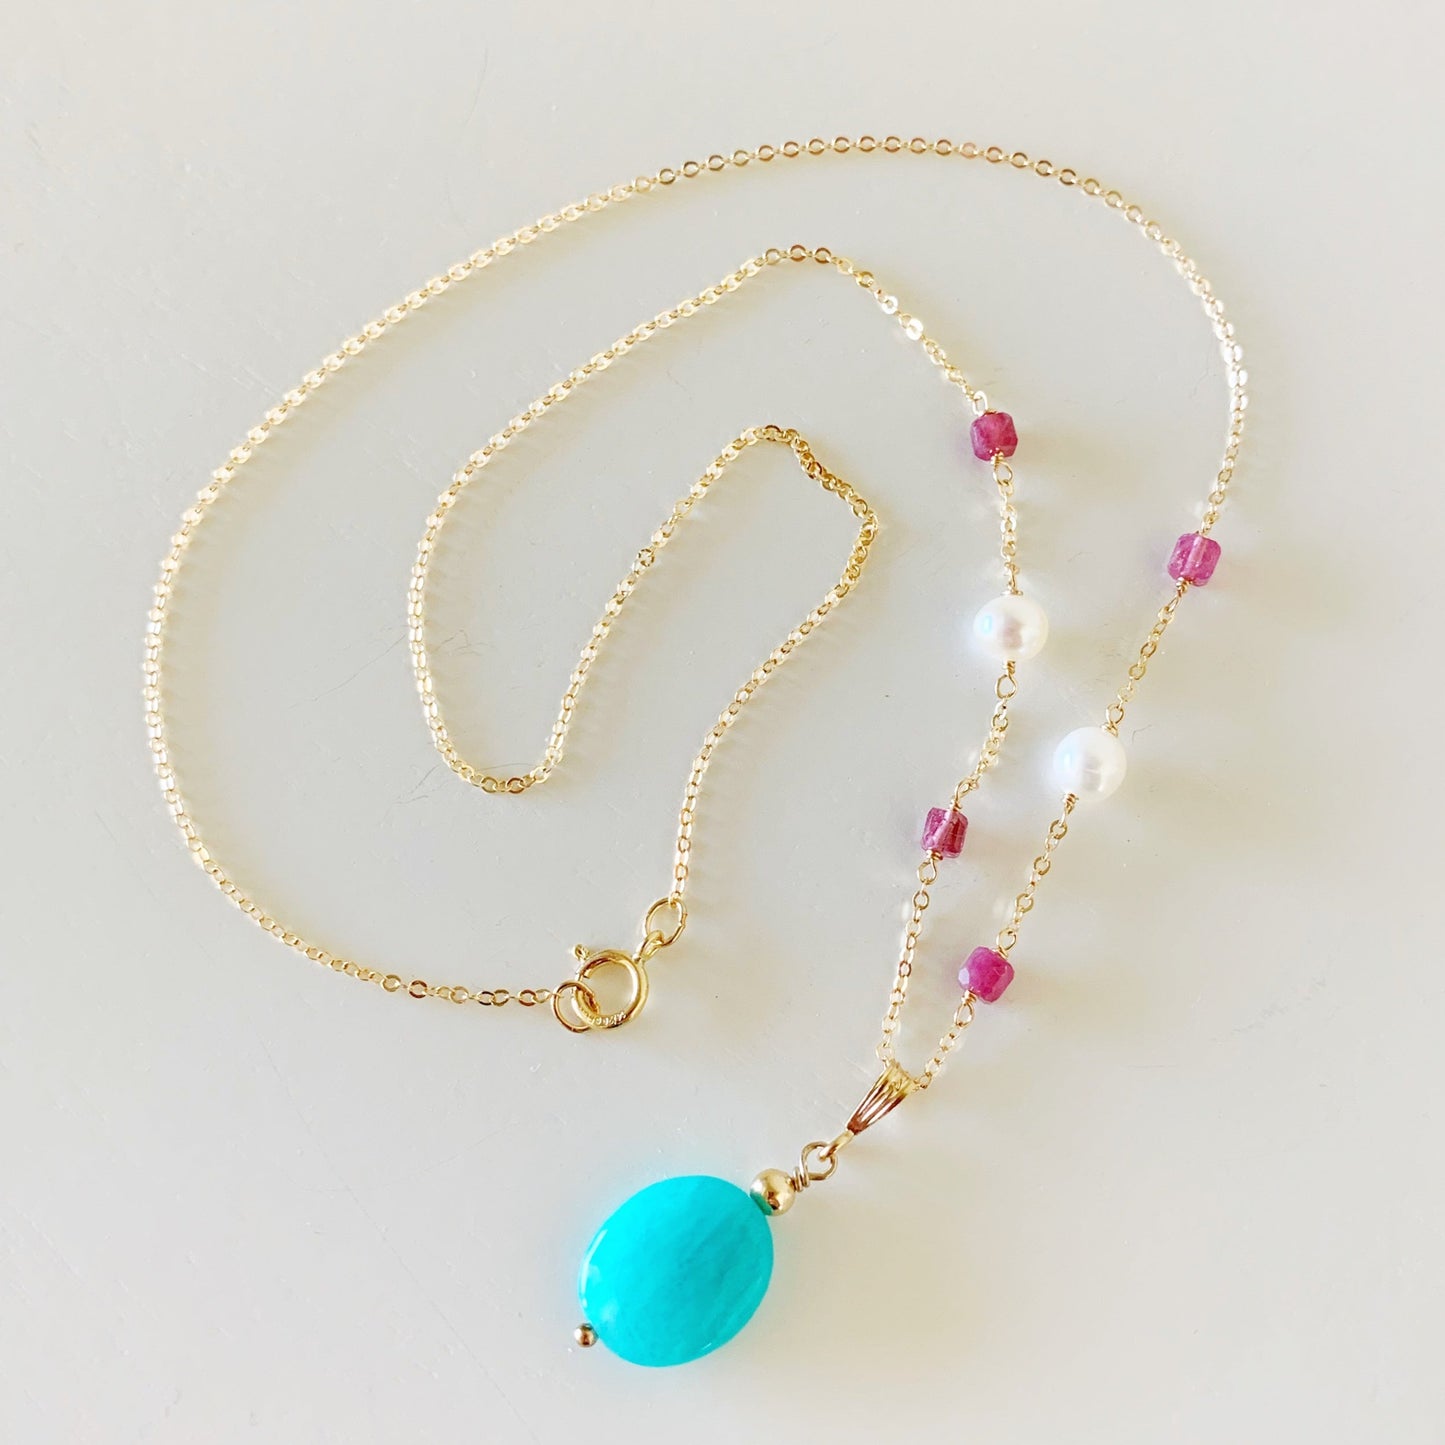 the harwich port necklace by mermaids and madeleines is a pendant style necklace with an amazonite stone suspended from 14k gold filled chain. the chain has pink tourmaline and freshwater pearls wired in. this necklace is coiled and photographed on a white surface